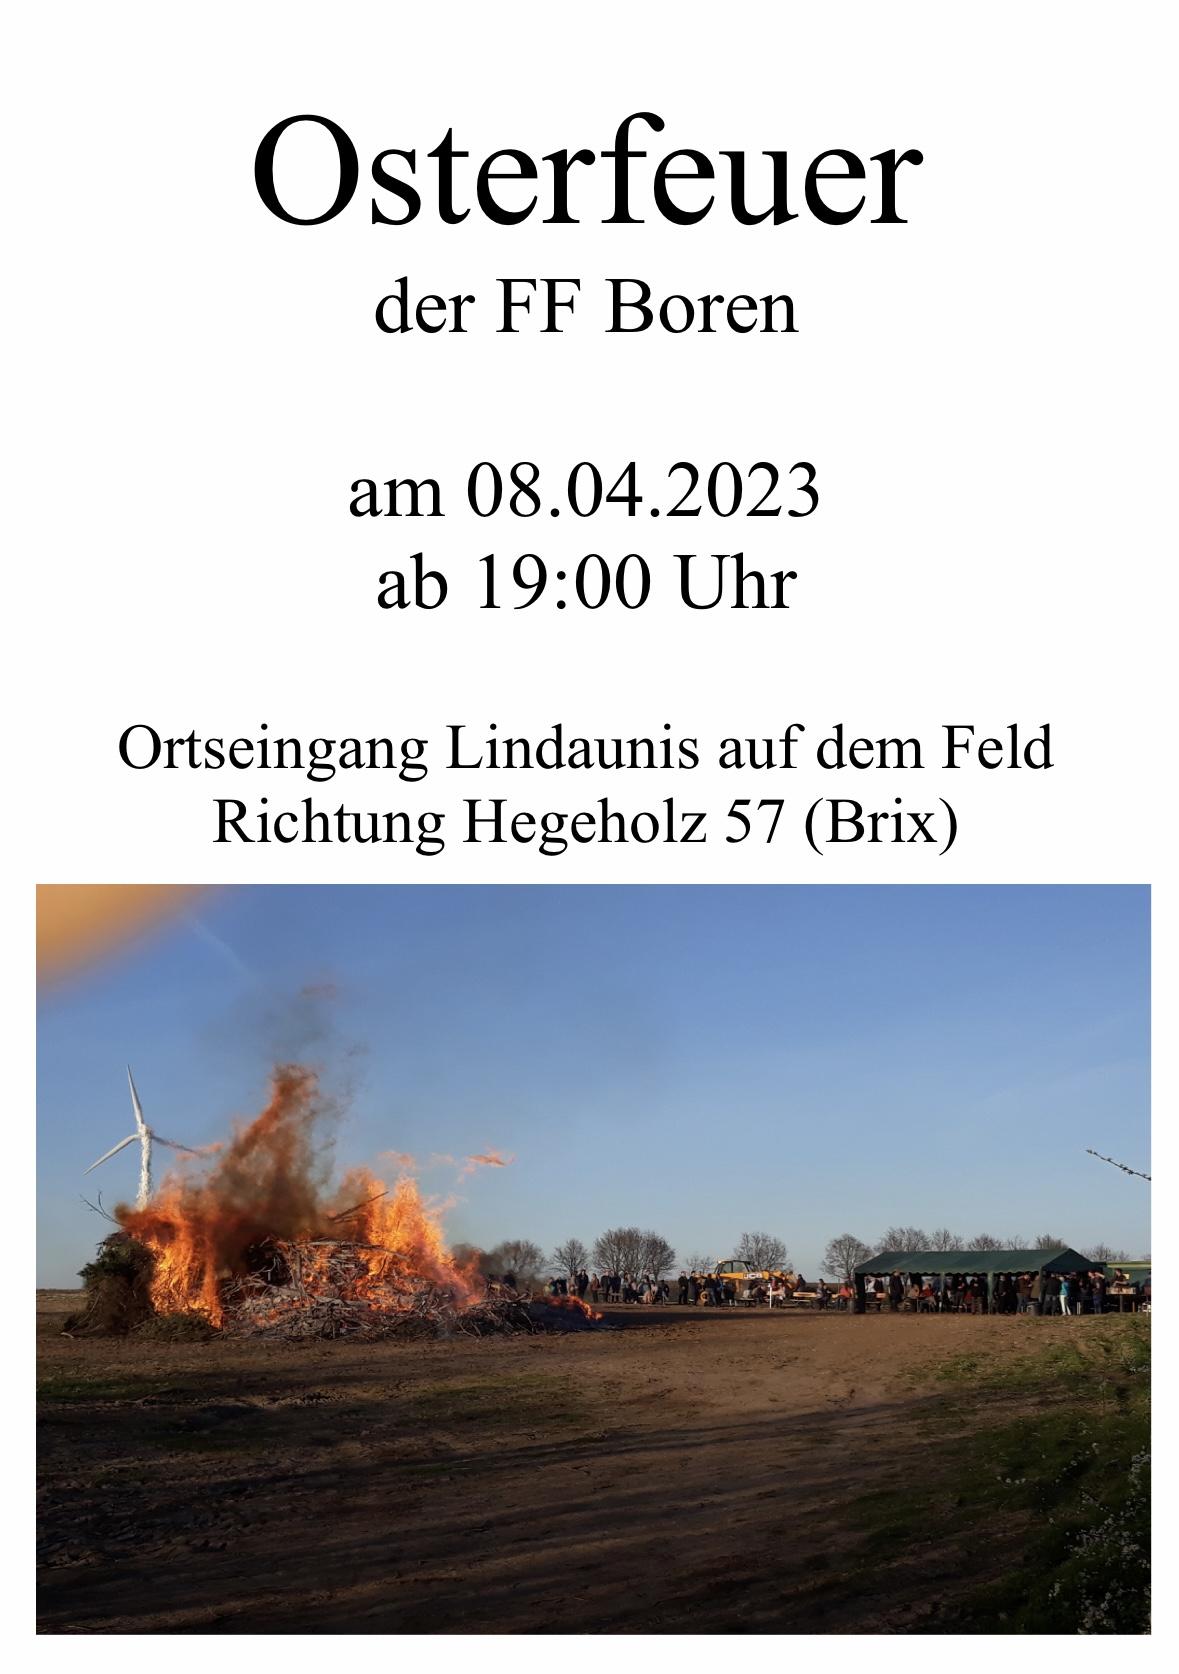 Osterfeuer 2023